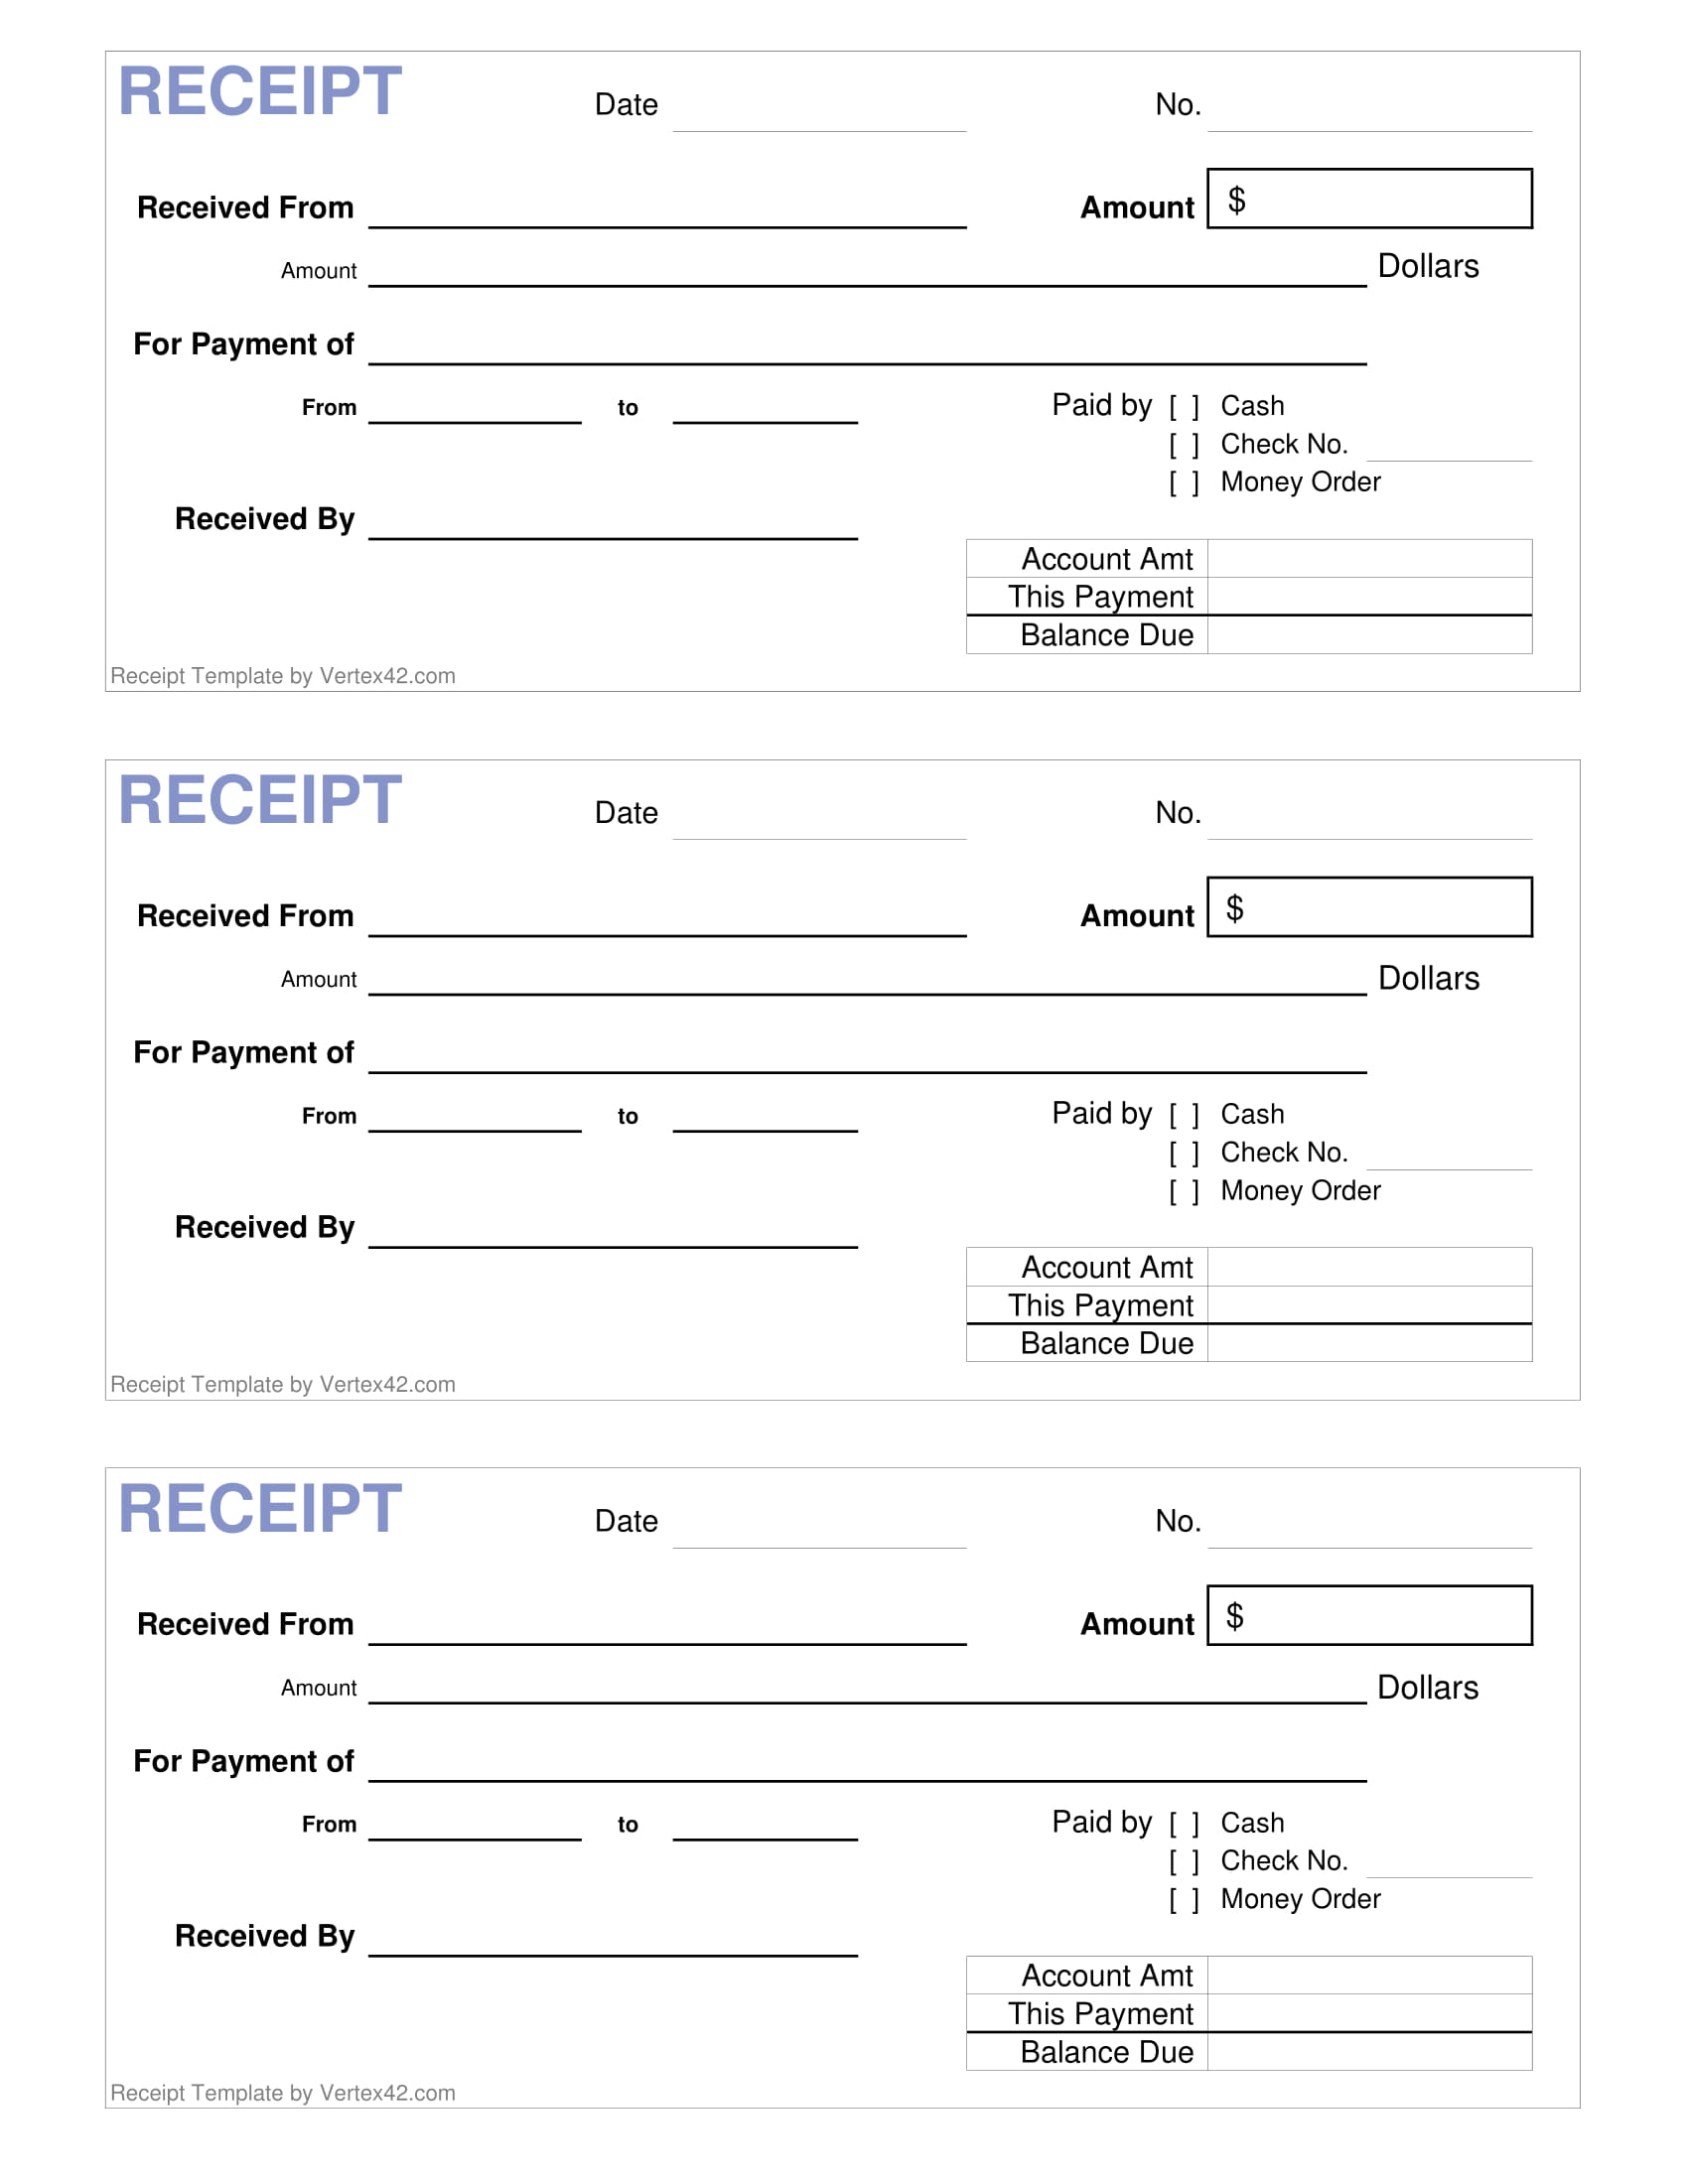 generic receipt of payment example